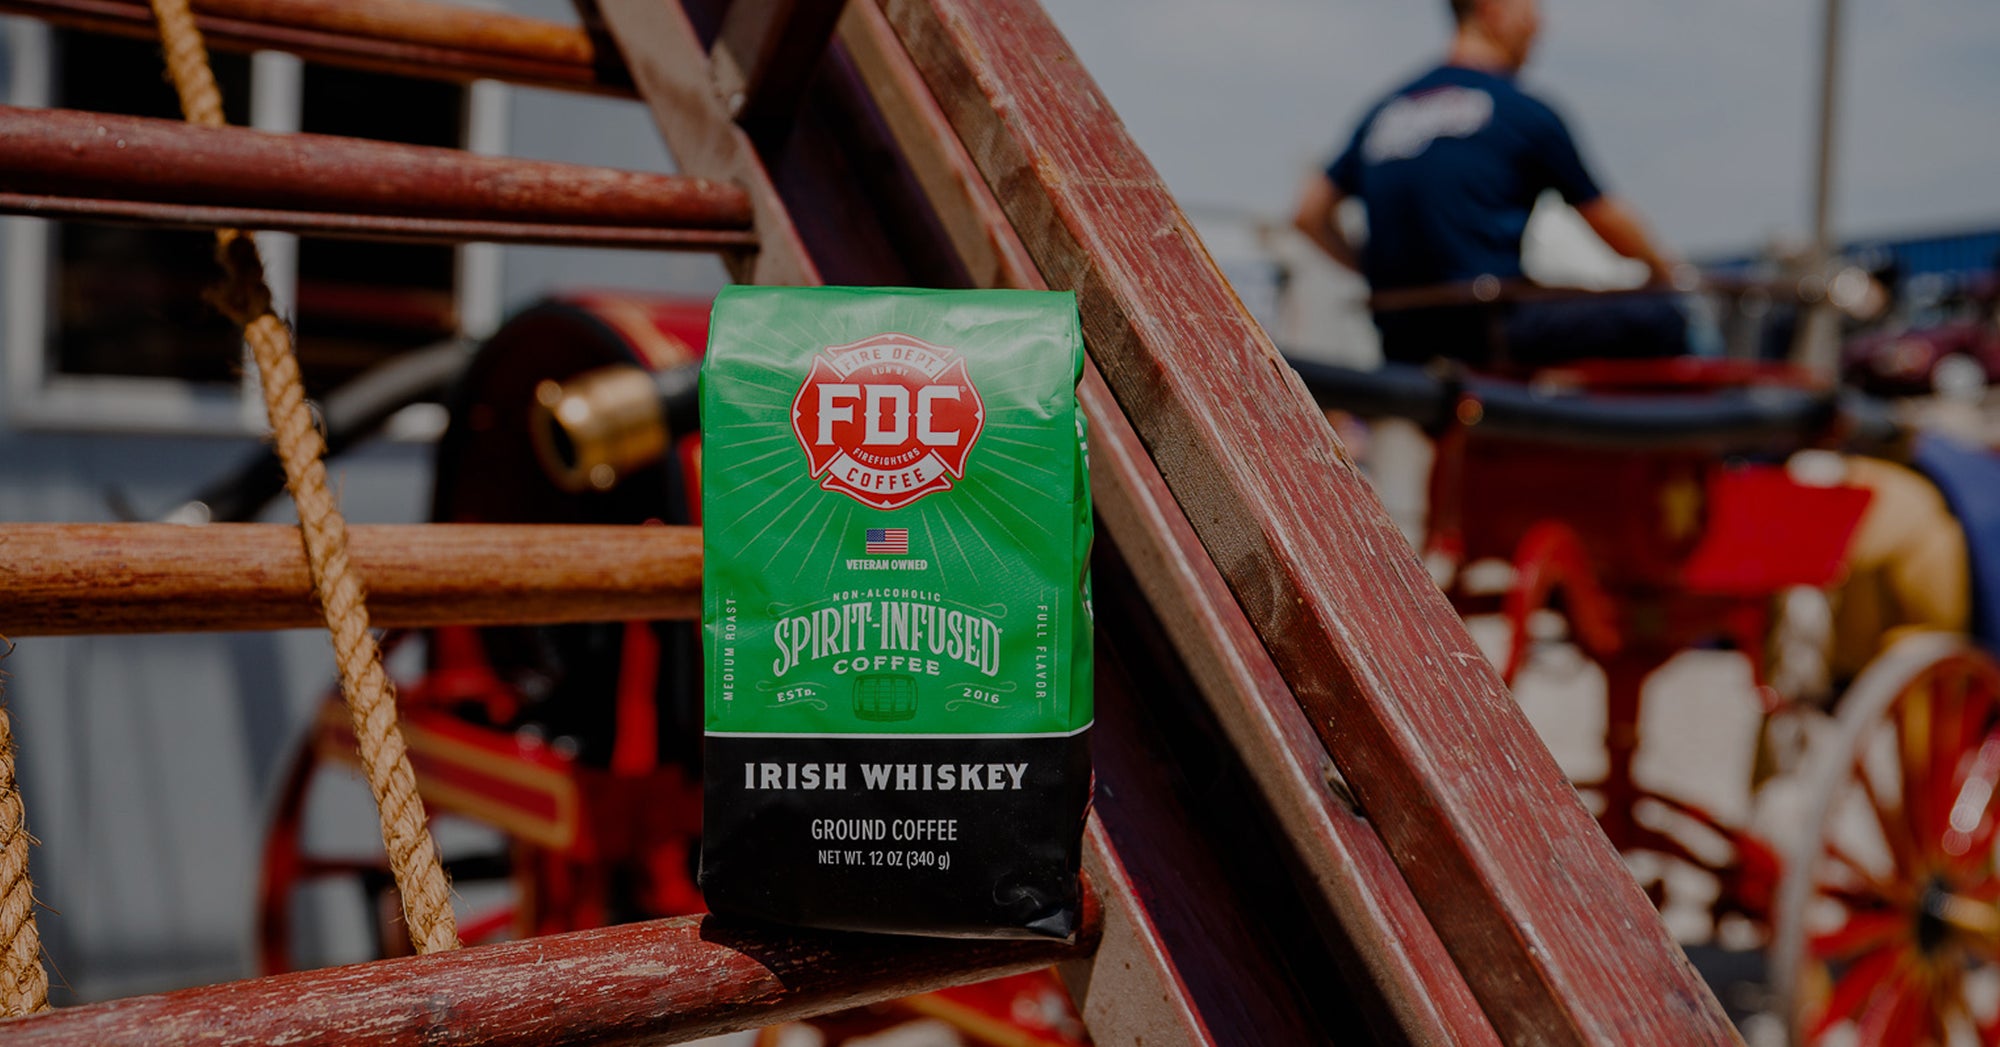 Irish Whiskey Infused Coffee bag on a vintage fire ladder.